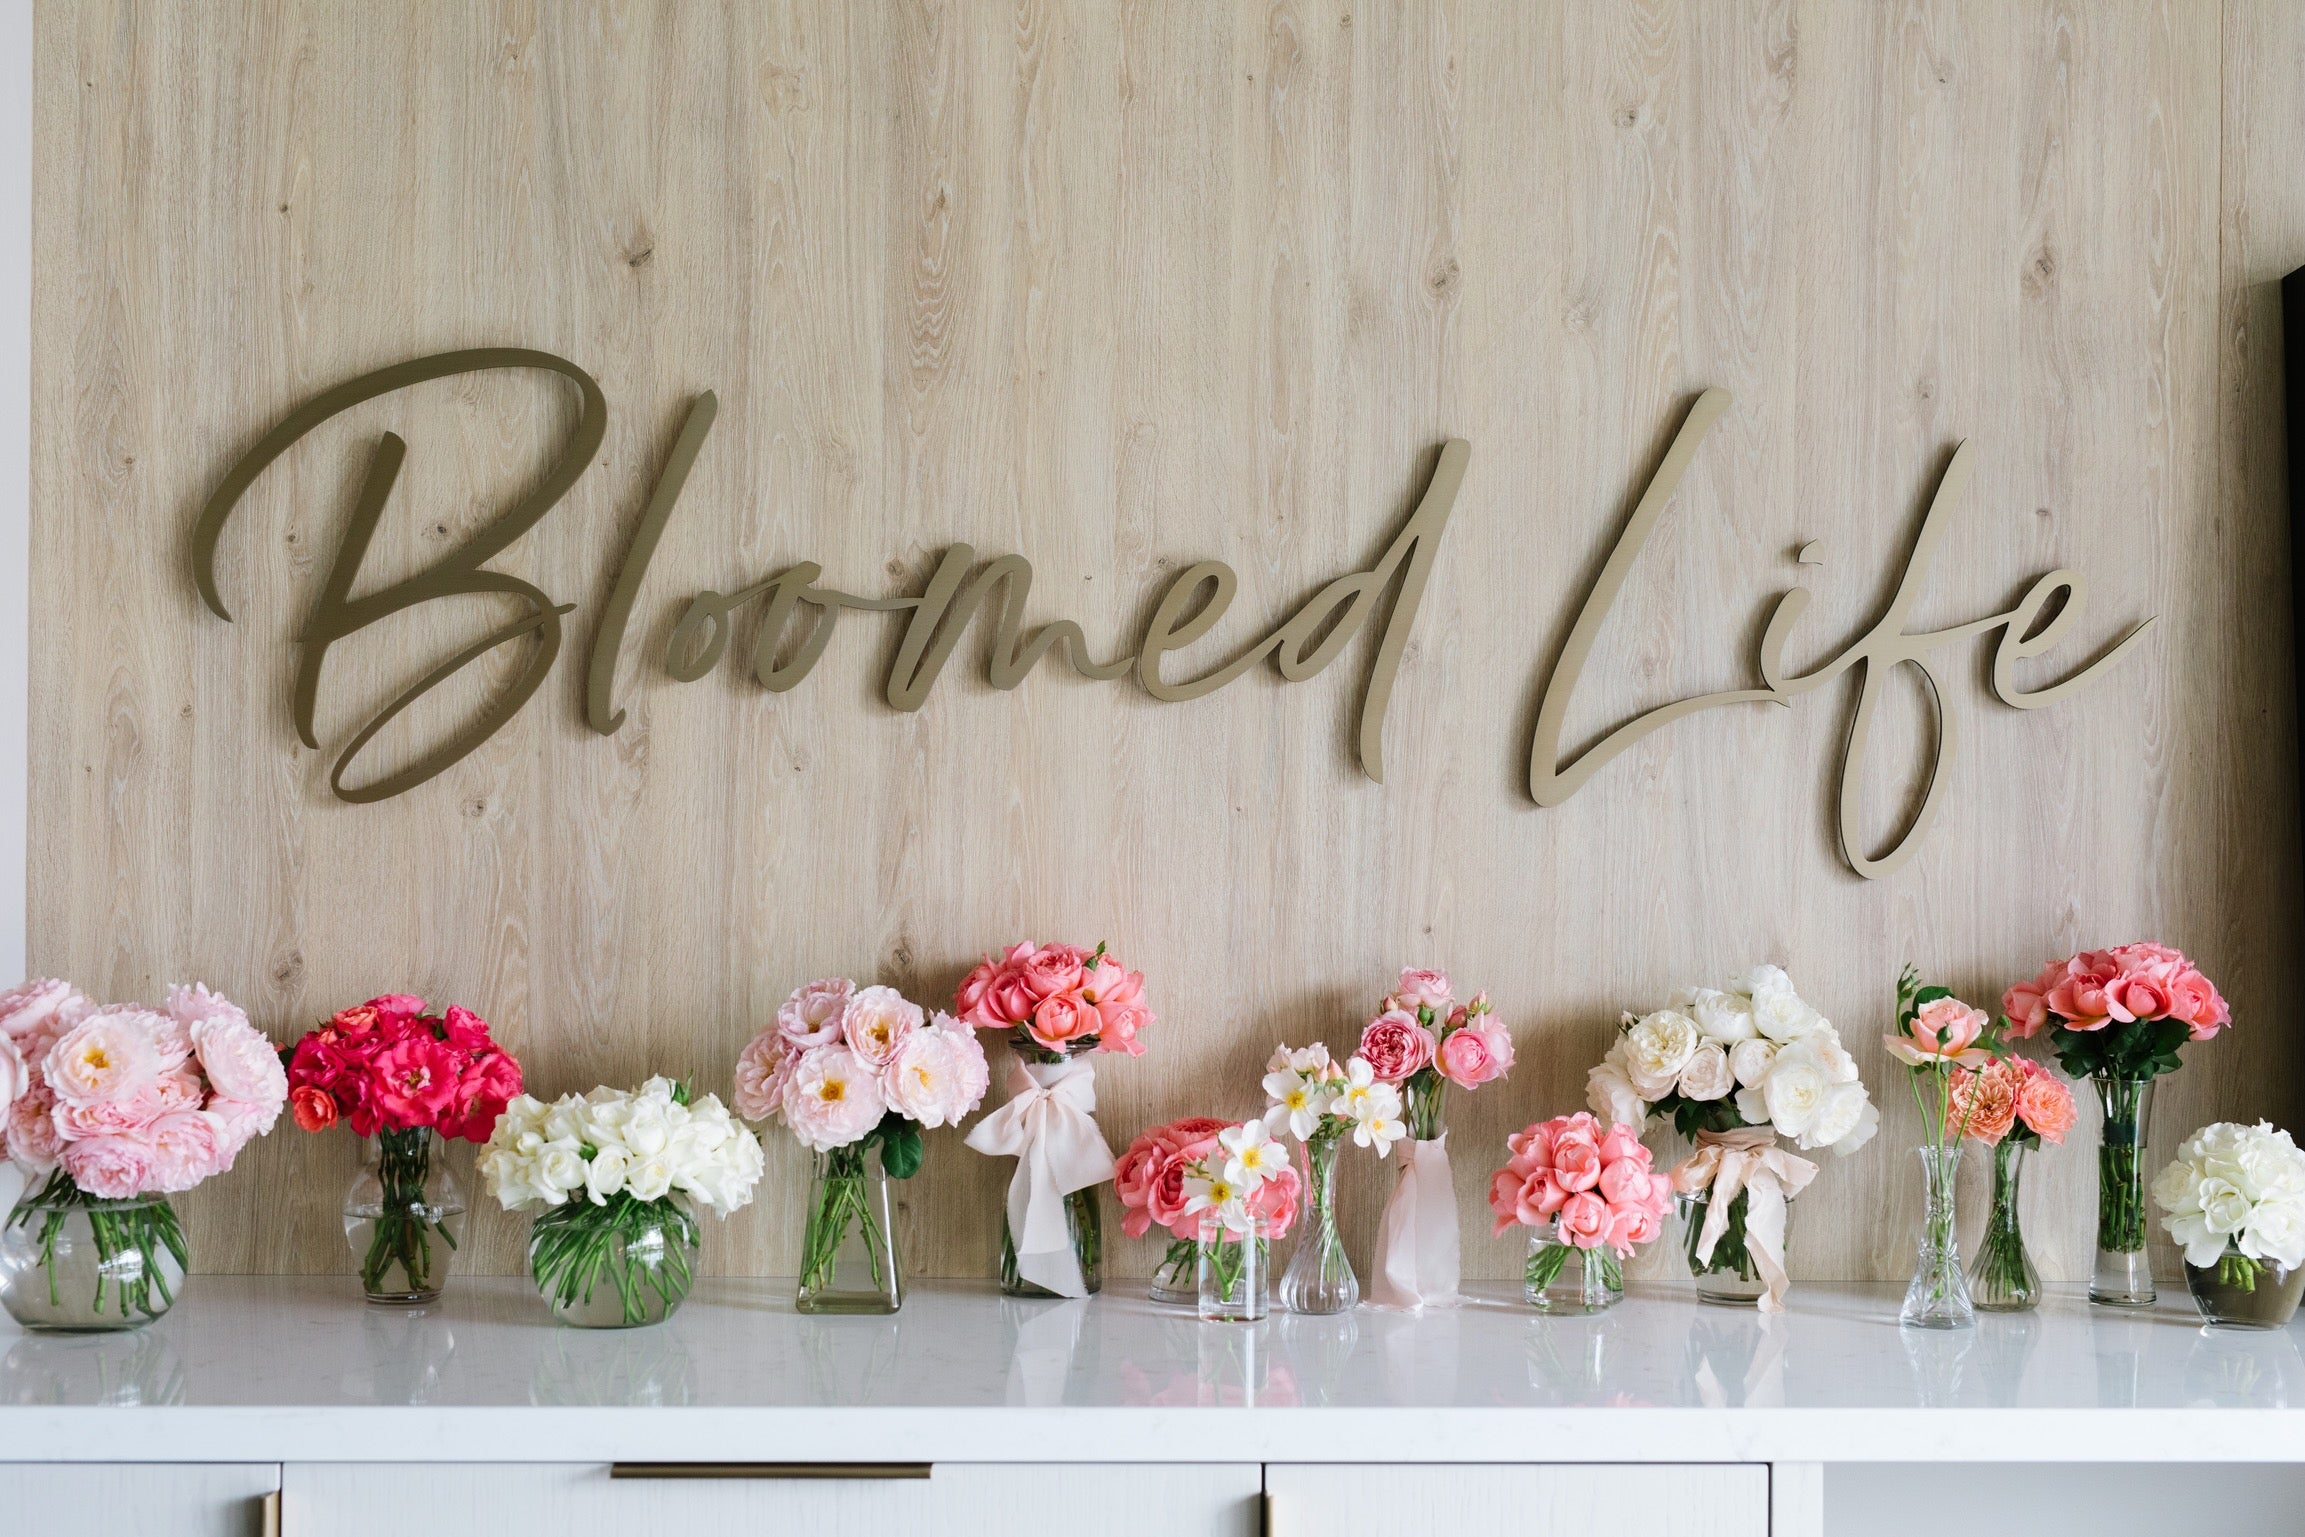 Bloomed Life Roses